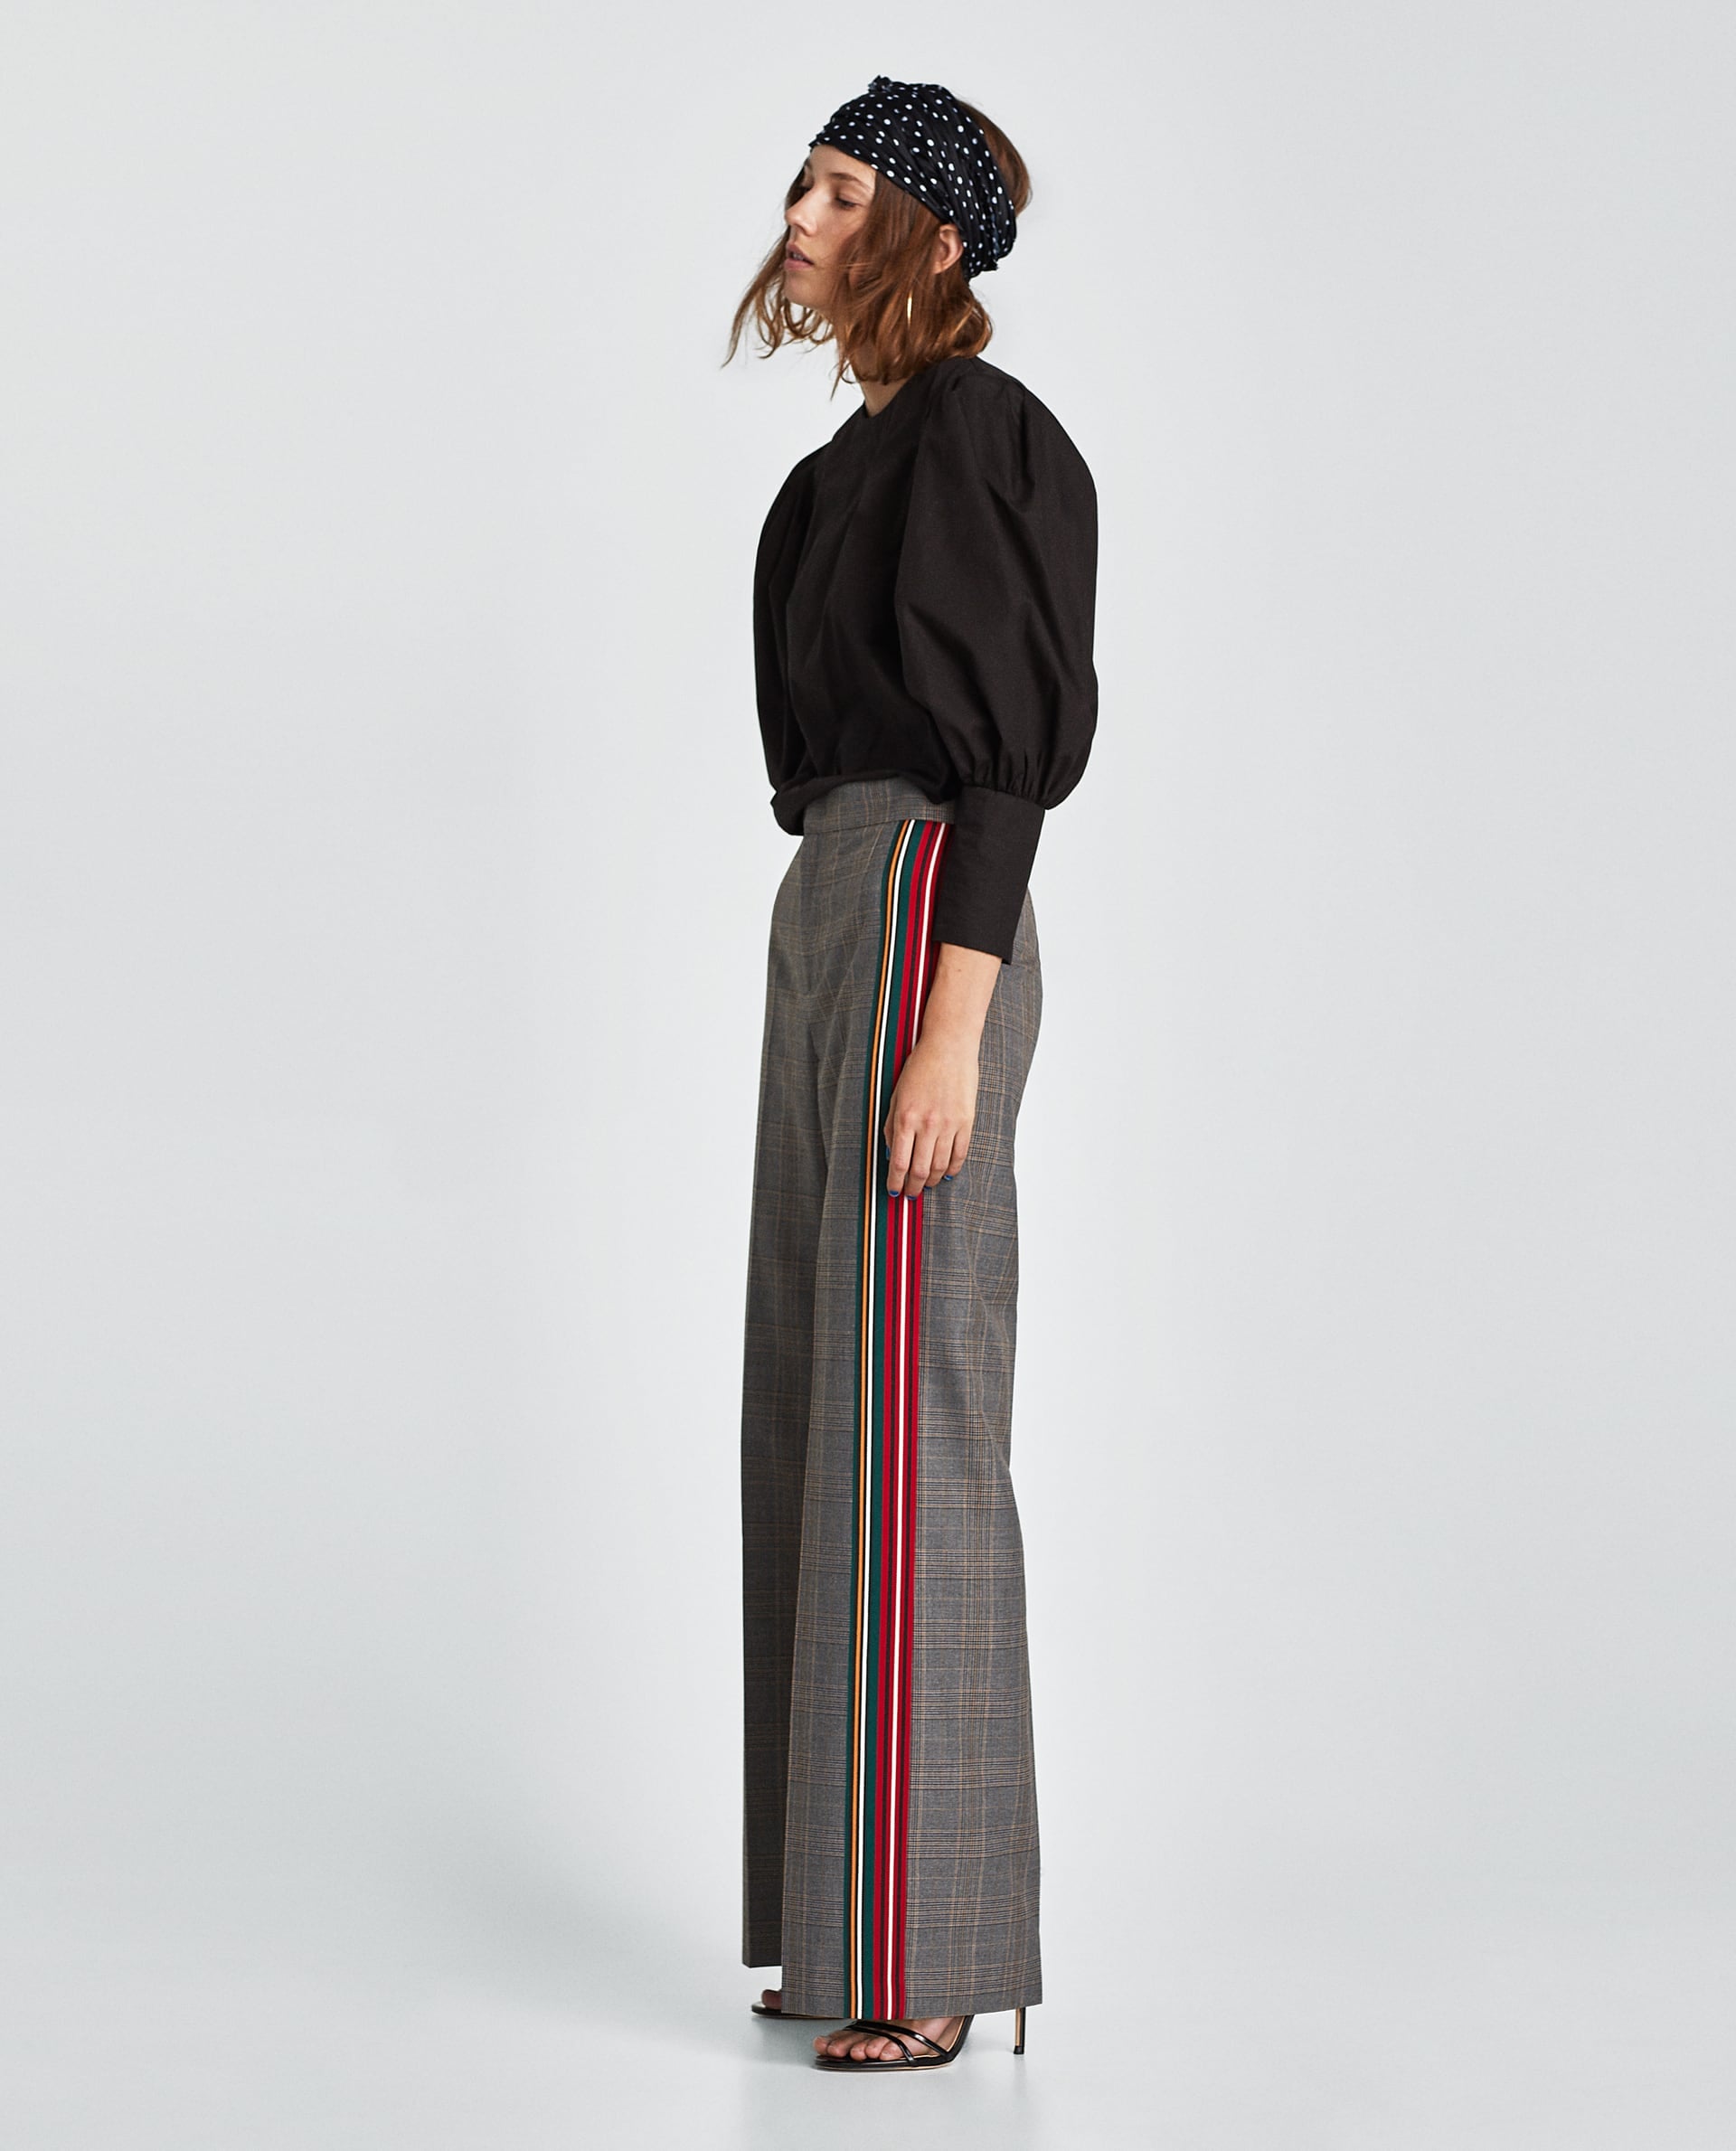 Best Bet Zara Checked Trousers